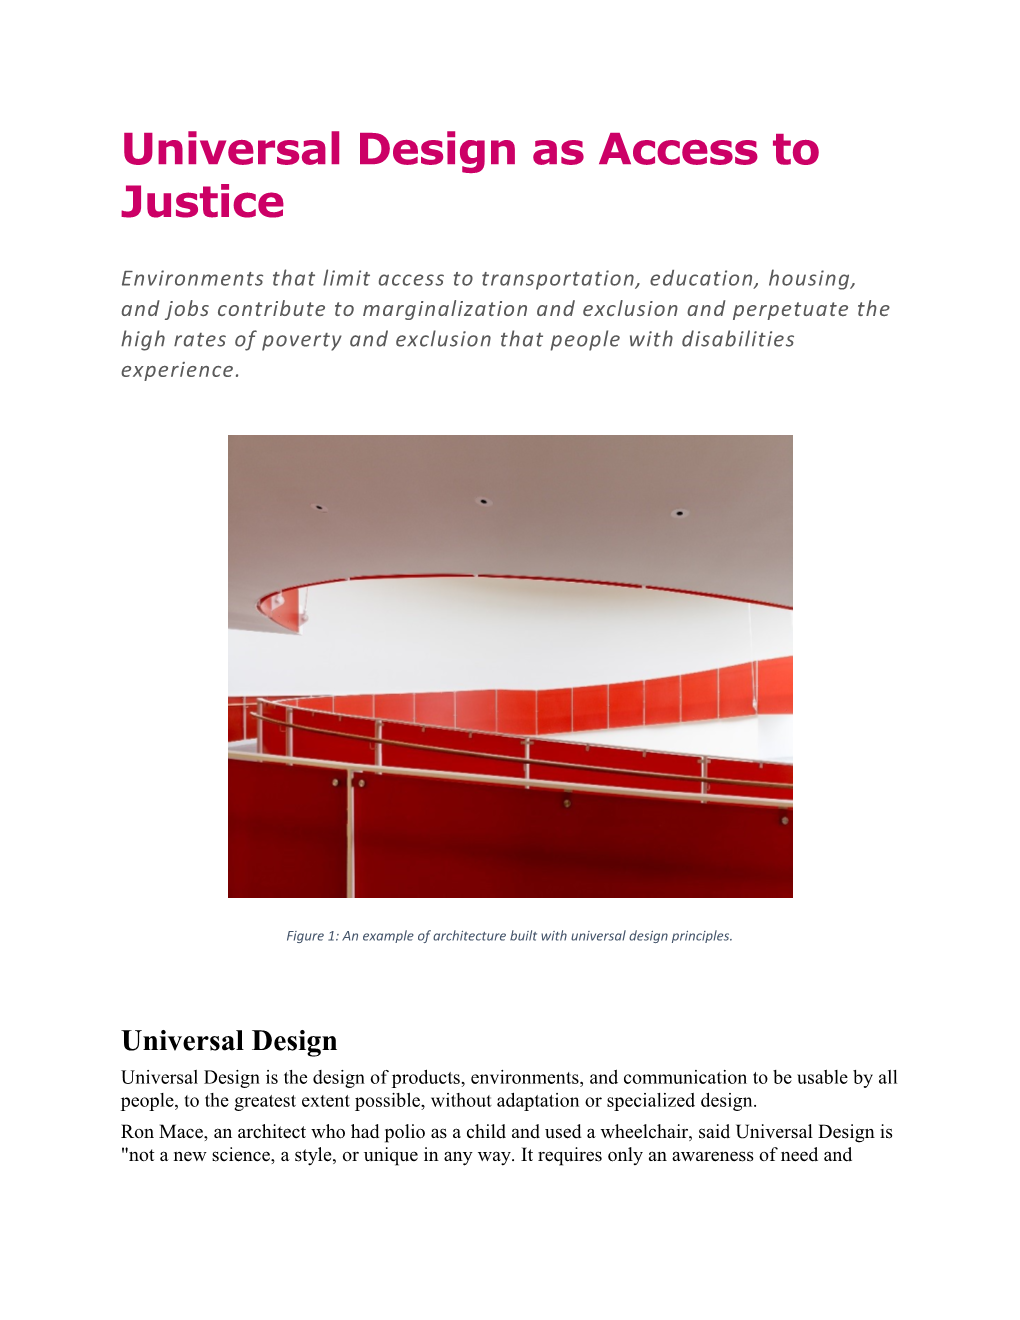 Universal Design As Access to Justice